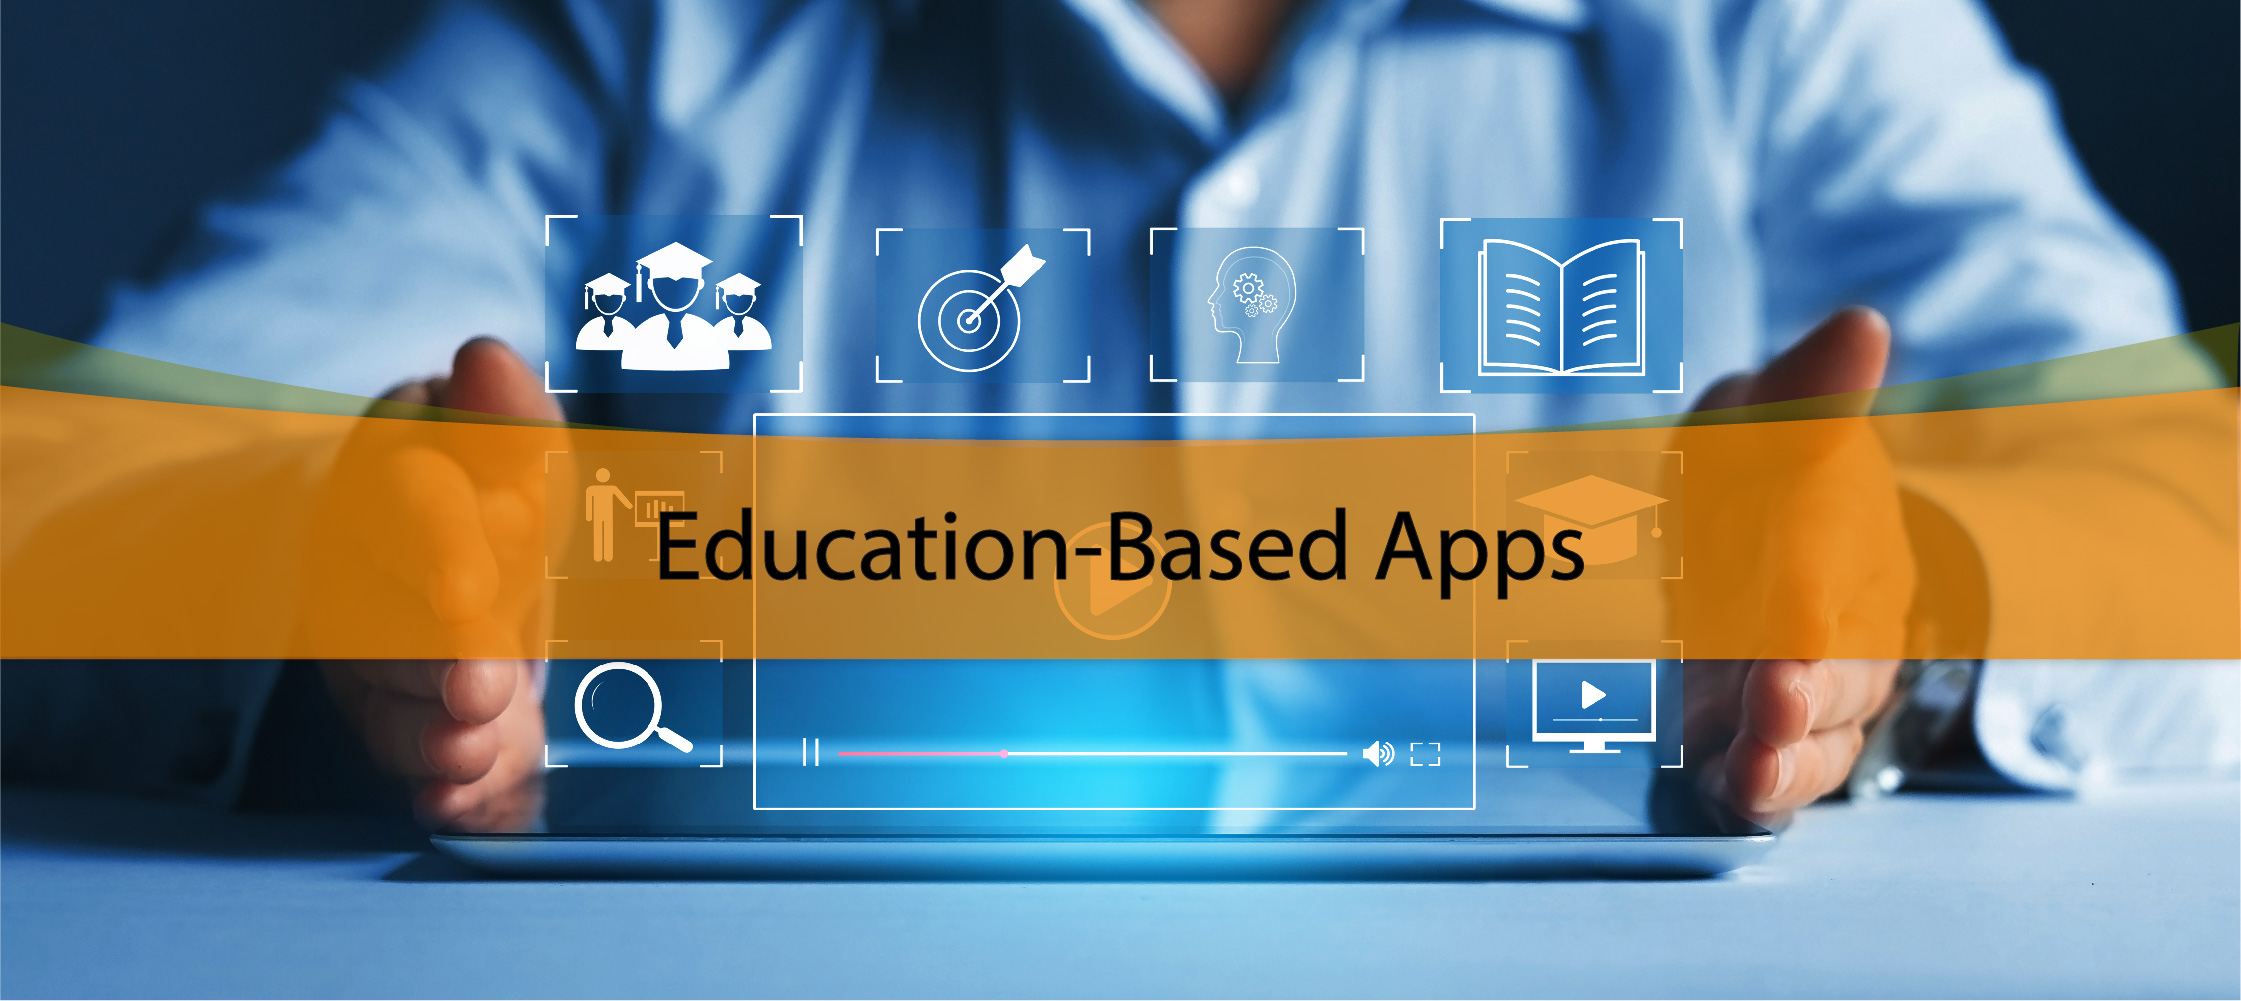 Education-Based Apps